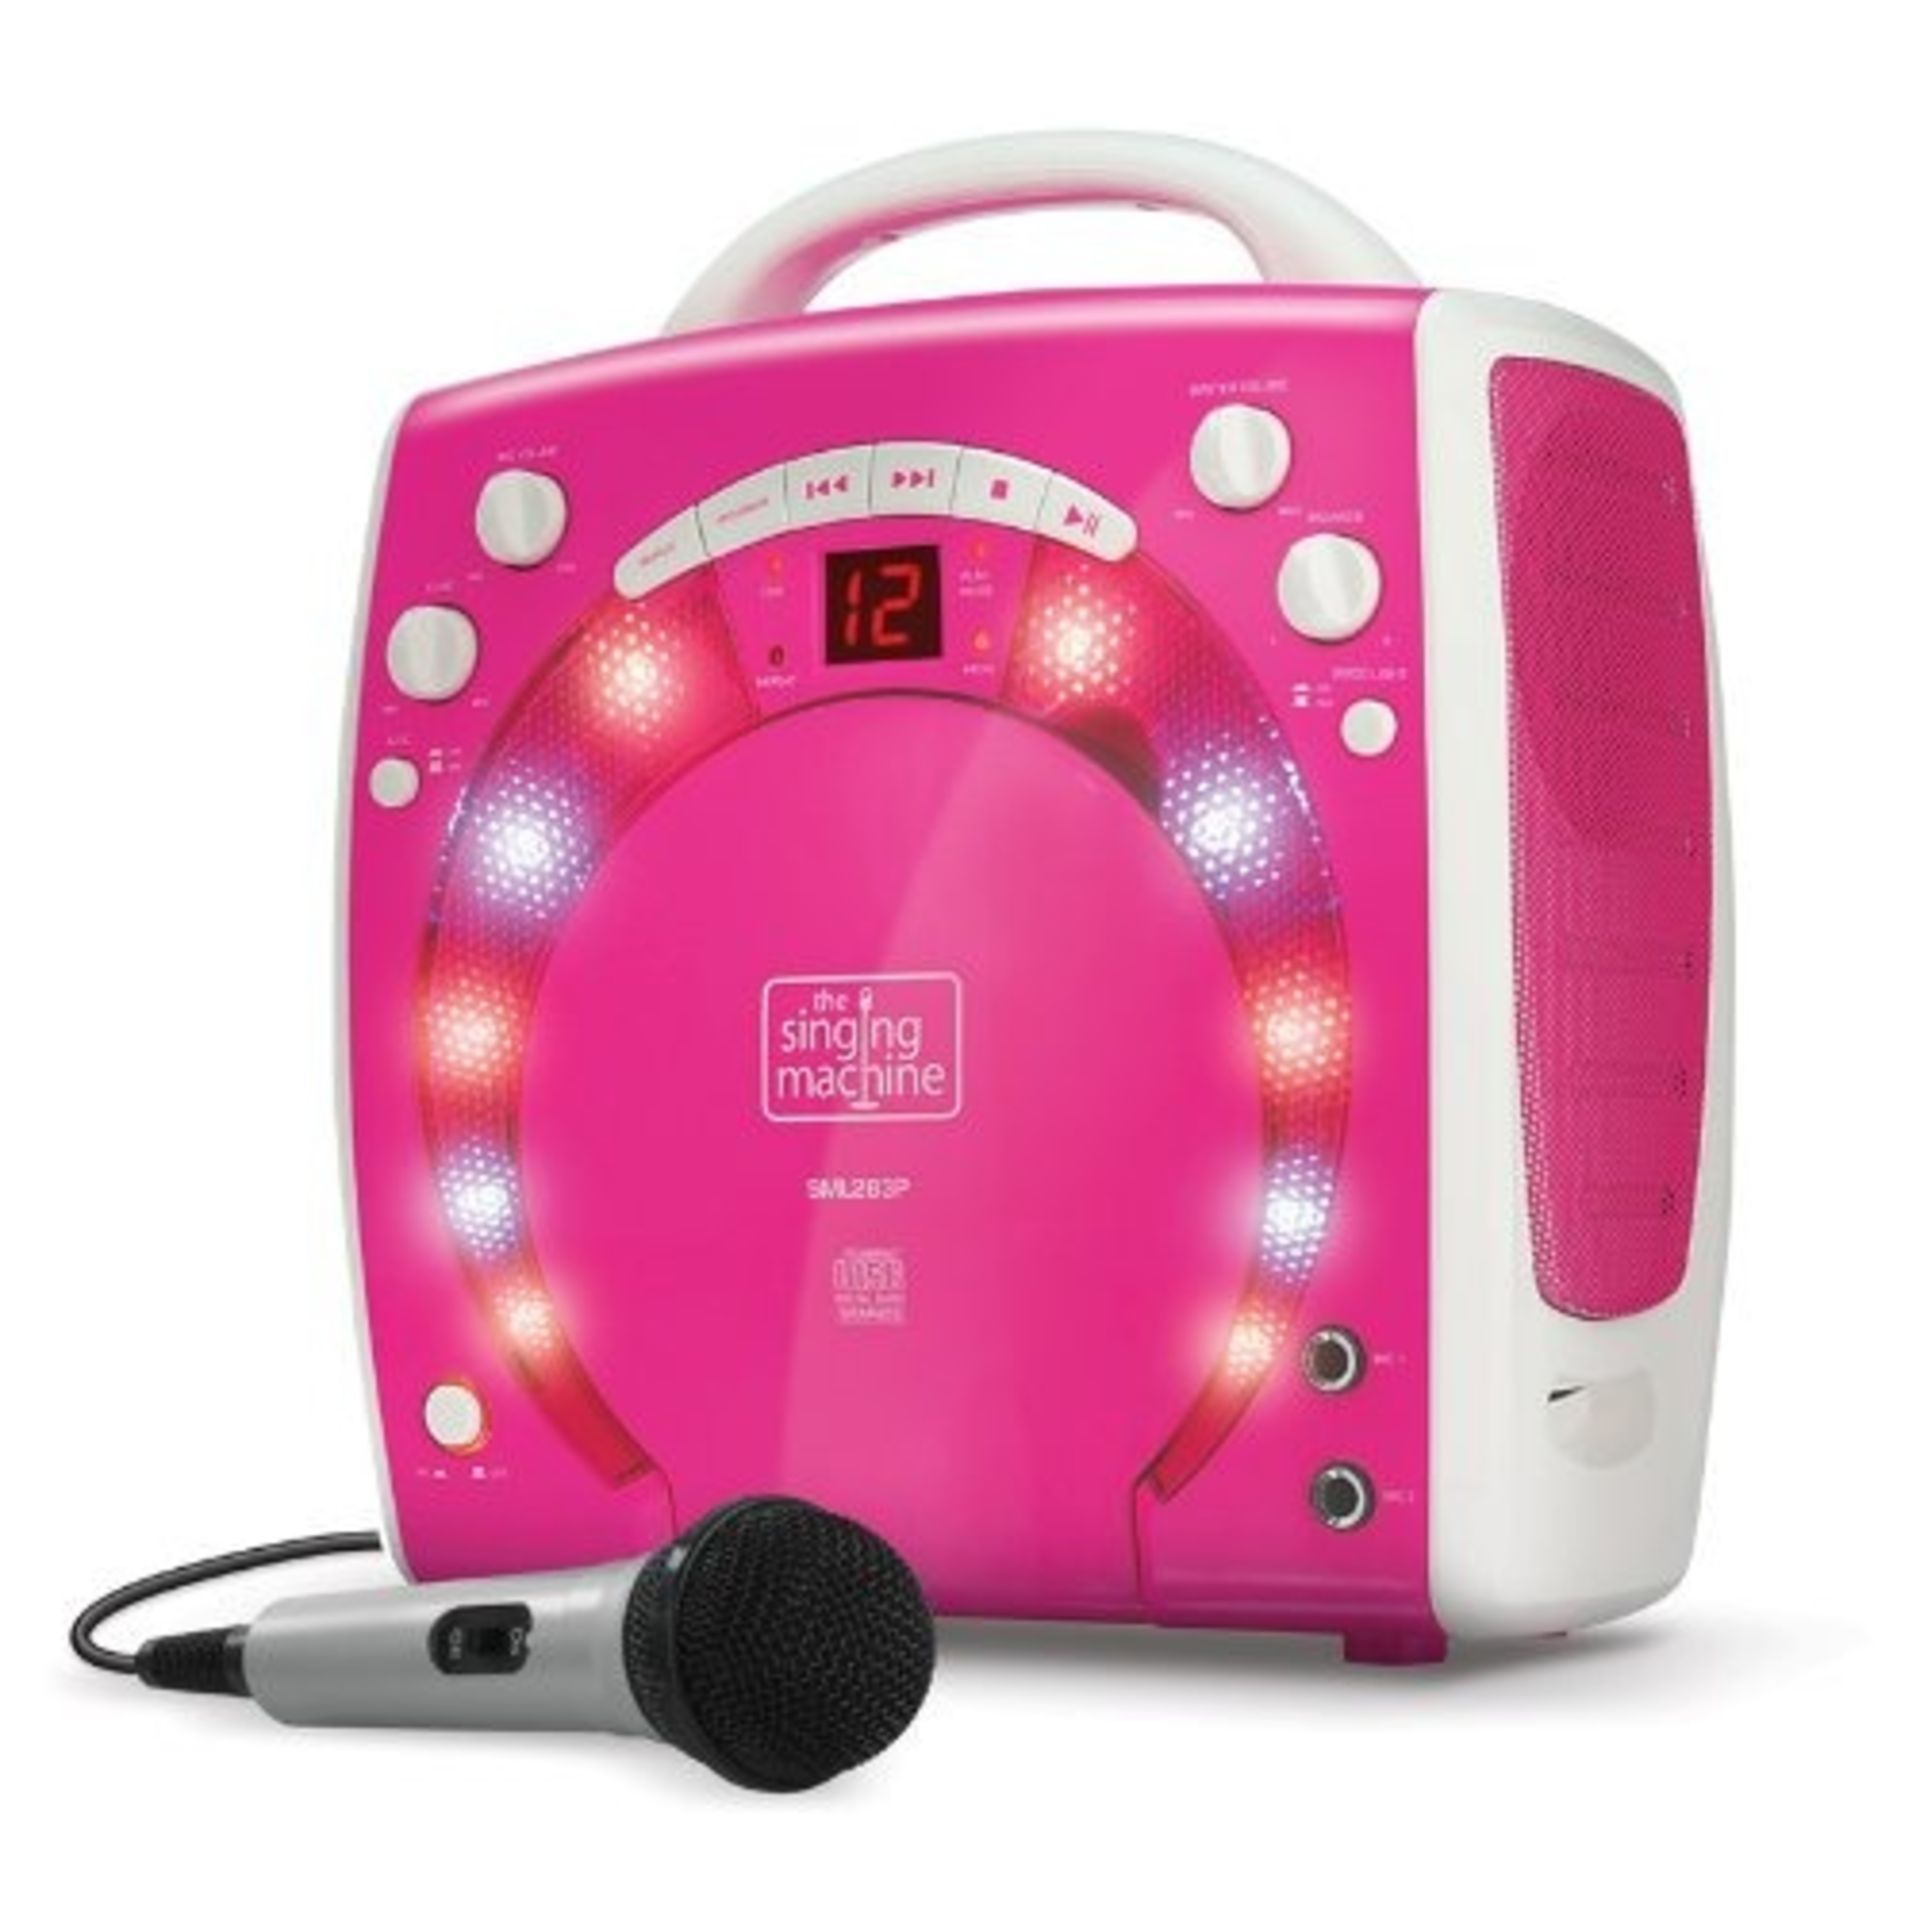 Bundle of 2x Singing Machine SML-283 Portable CD-G Karaoke Player and 3 CDGs Party Pack - Pink -